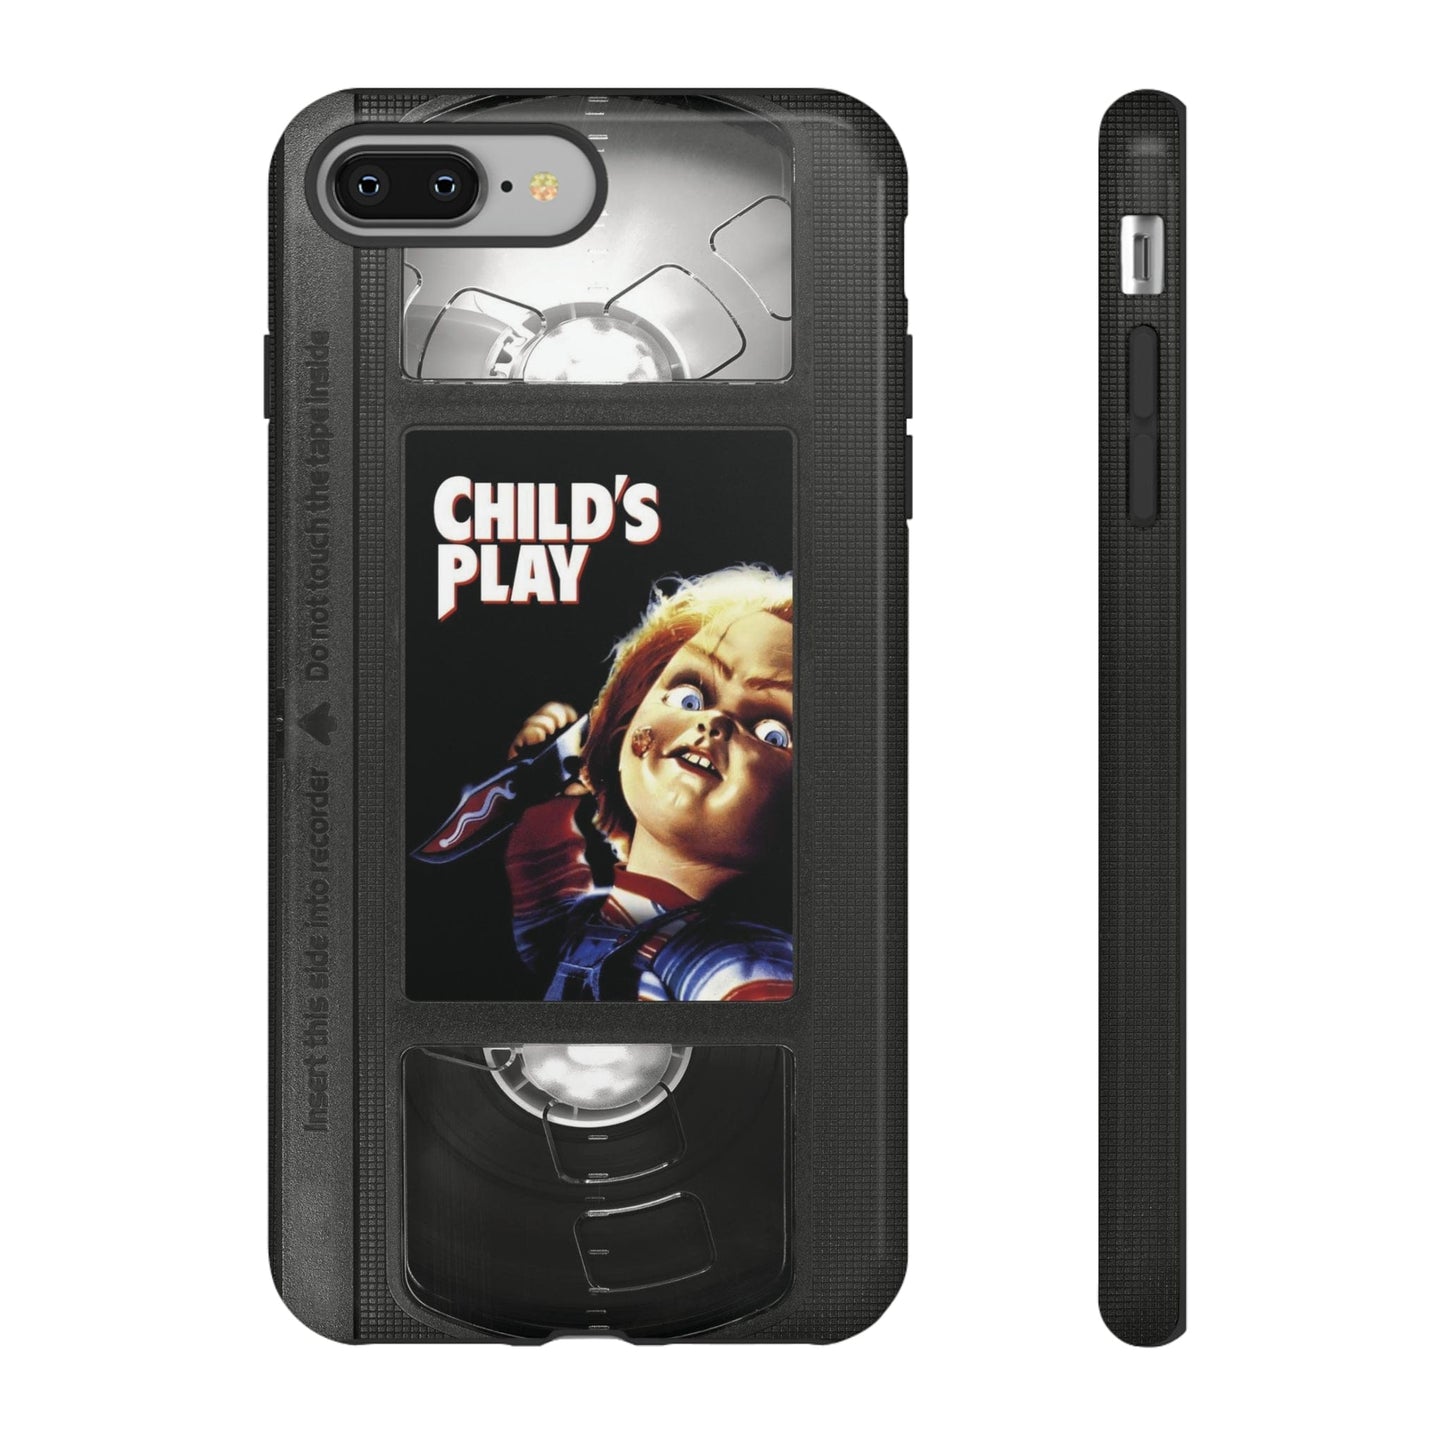 Child's Play Impact Resistant VHS Phone Case